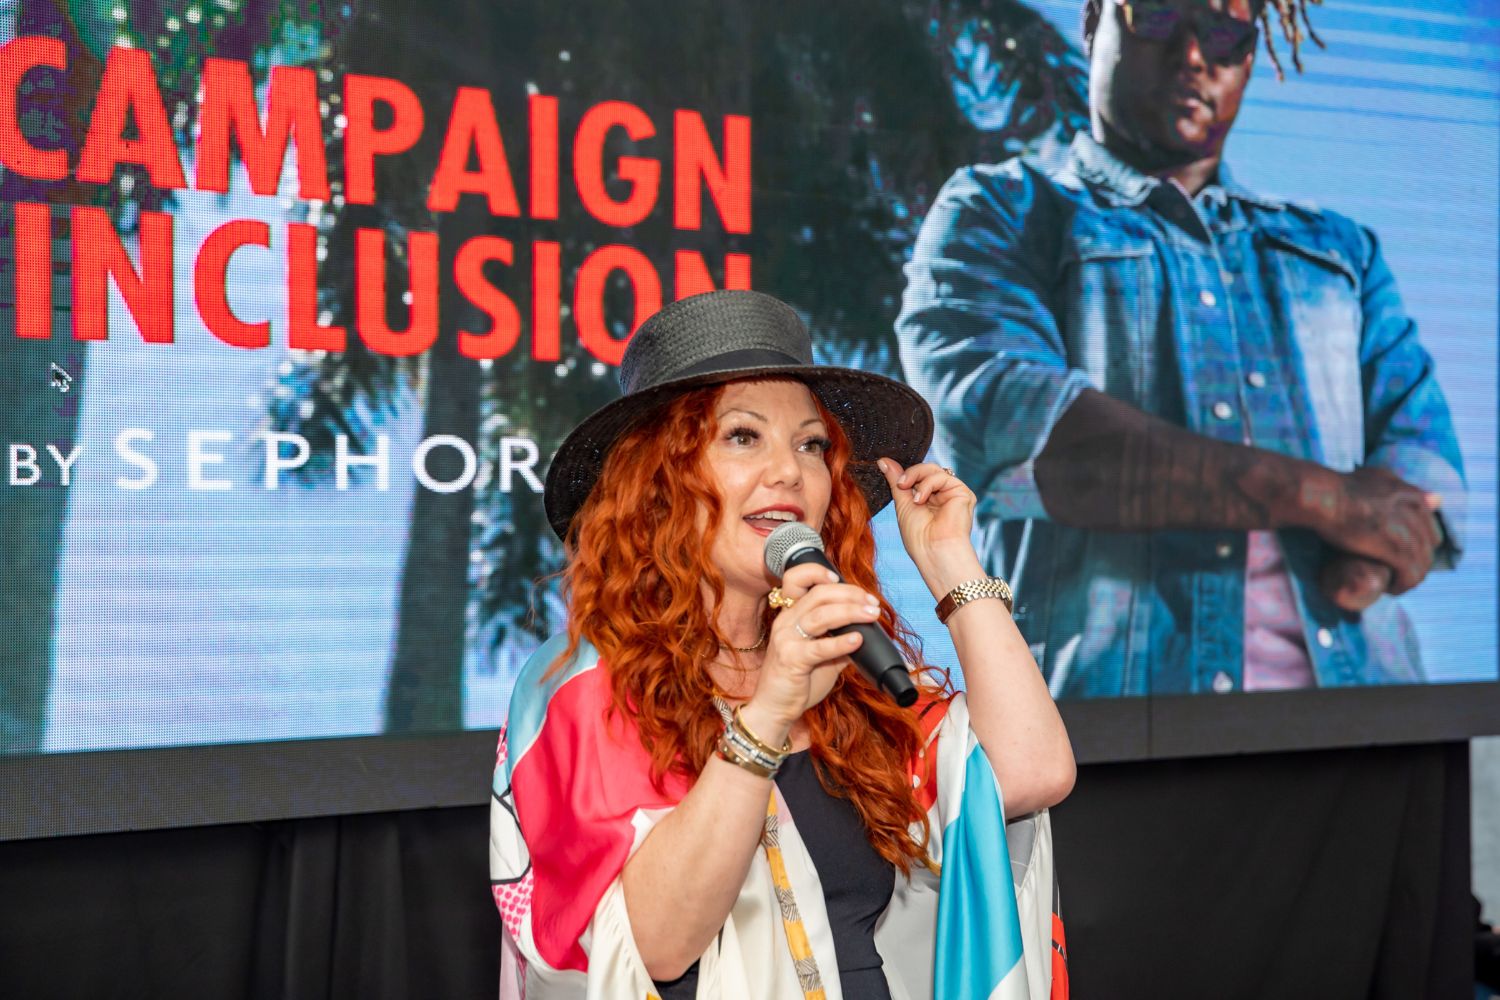 Runway Of Dreams Foundation Launches 'The Campaign For Inclusion'